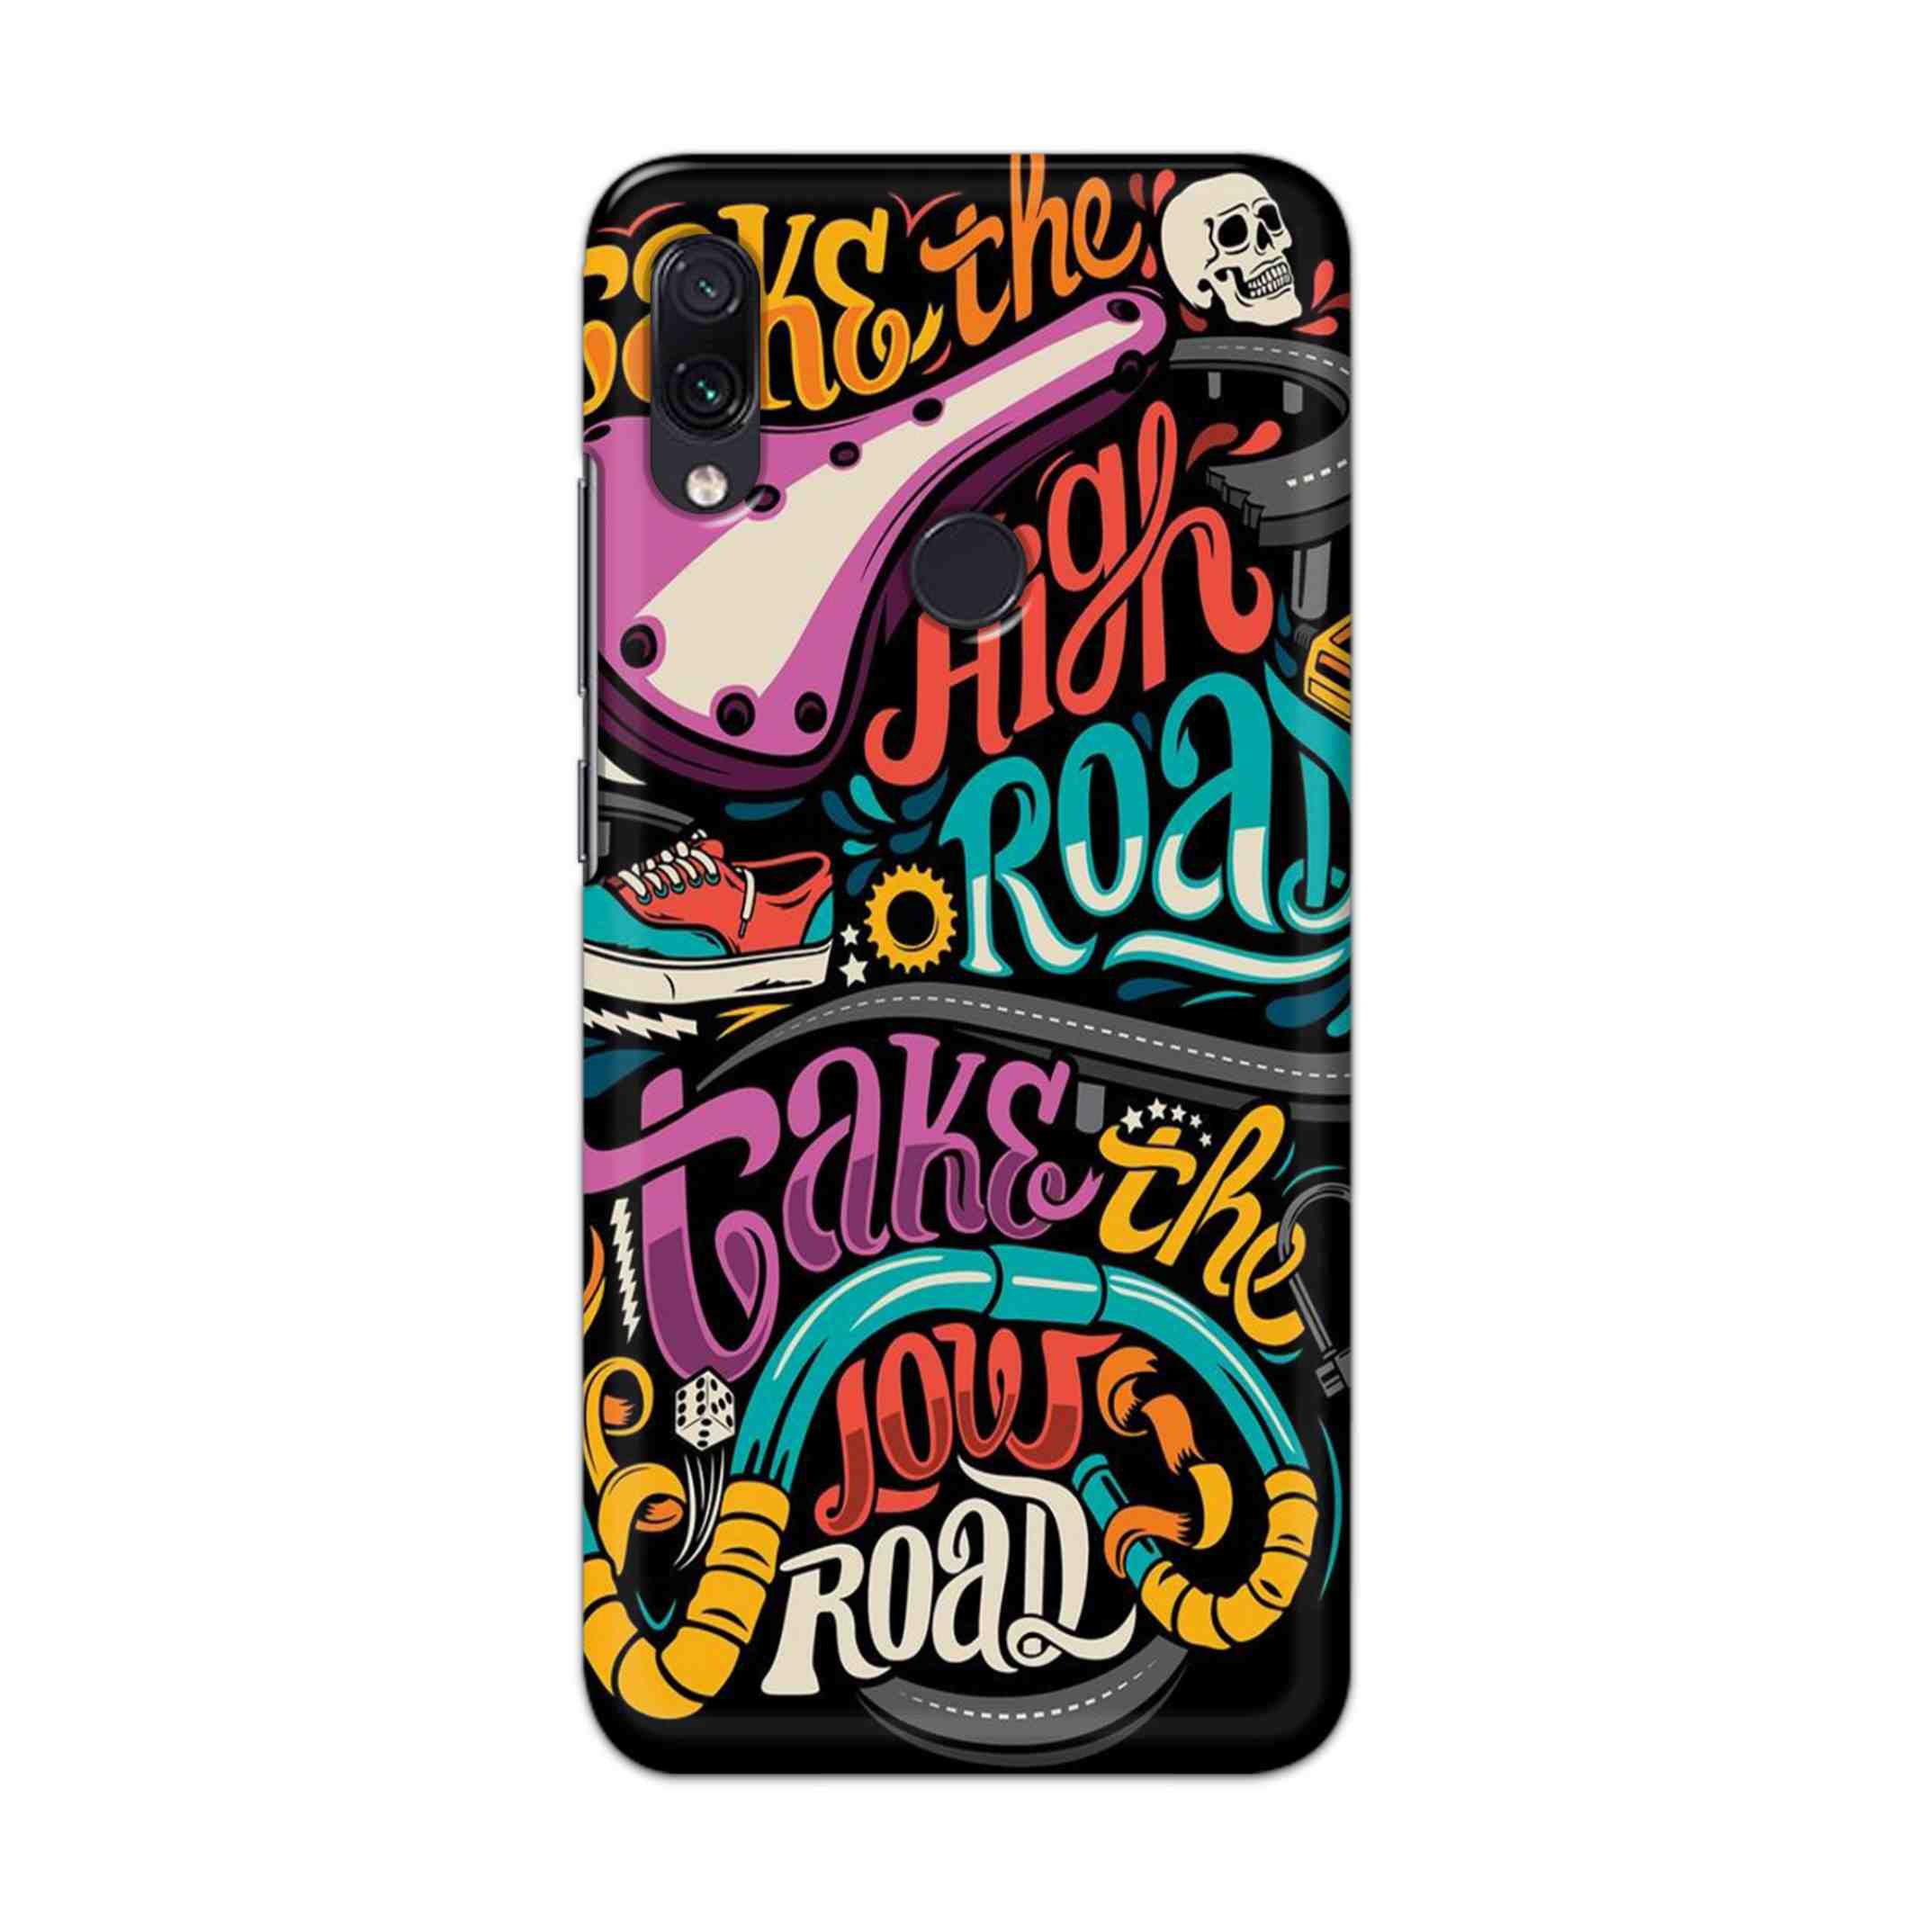 Buy Take The High Road Hard Back Mobile Phone Case Cover For Redmi Note 7 / Note 7 Pro Online